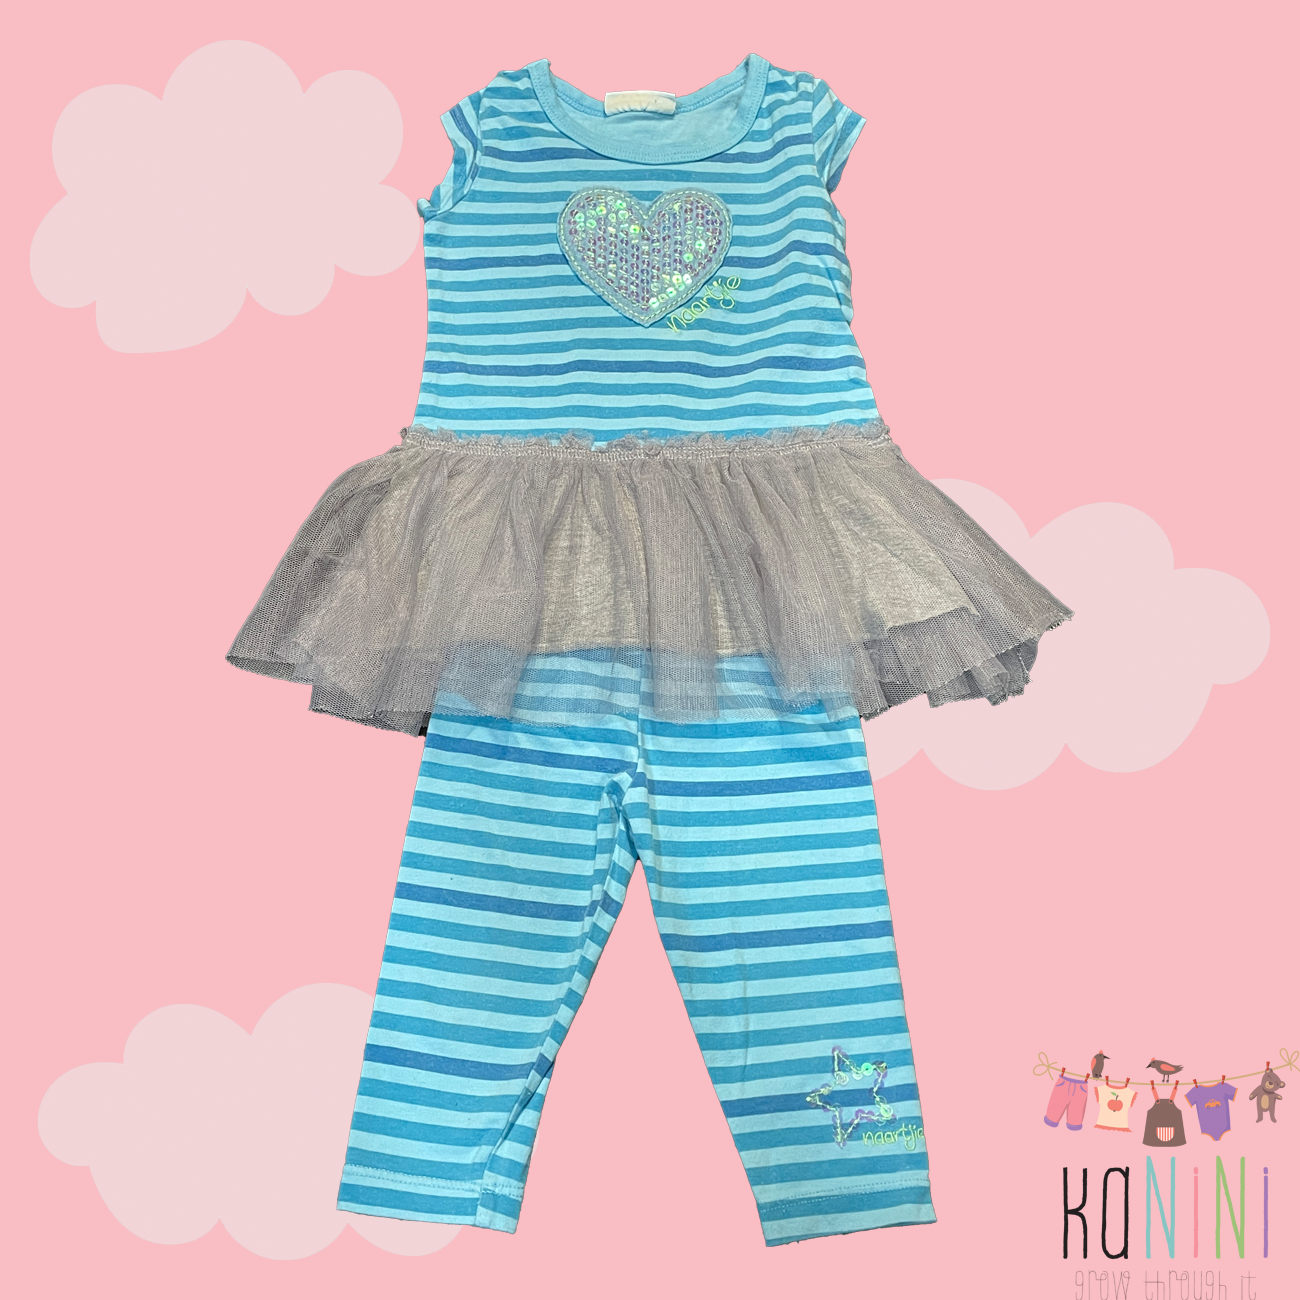 Featured image for “Naartjie 3 - 6 Months Girls Blue Striped Set”